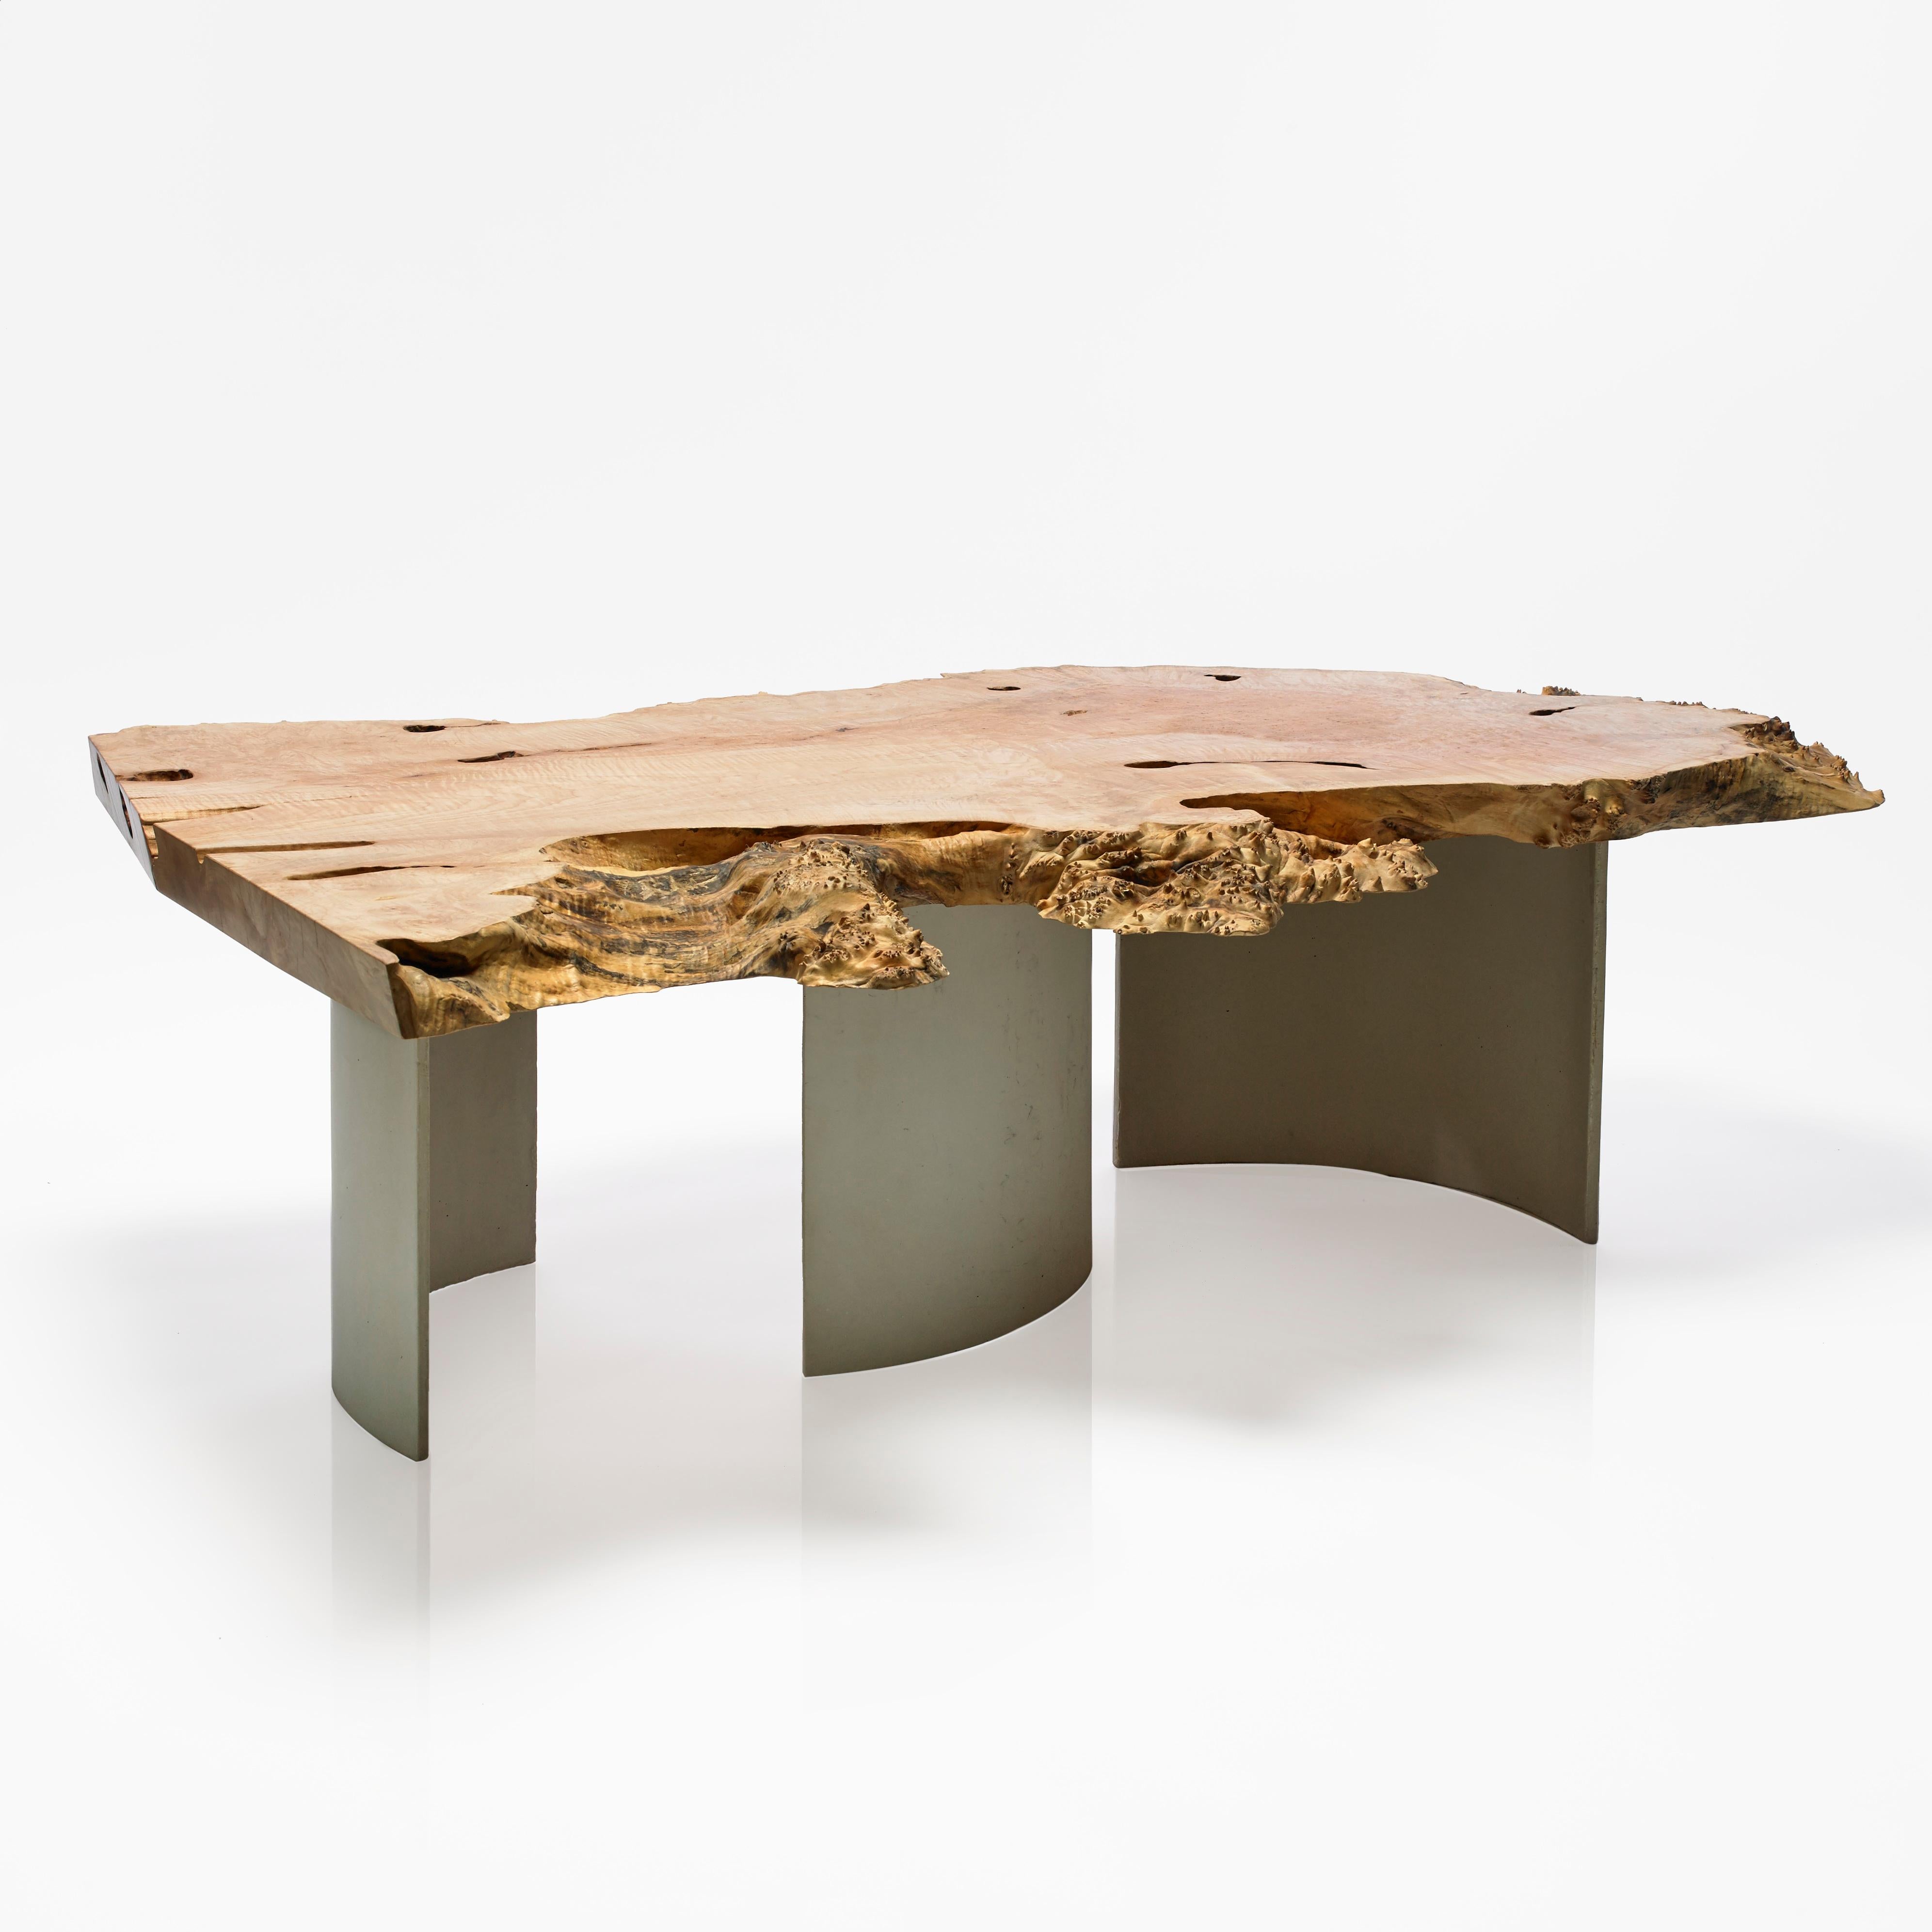 A modern, sculptural, yet natural edge coffee table that will age gracefully. A piece of spalted maple set on three curved concrete legs, spaced to follow the natural curves of the tabletop and grain, using a high-performance concrete that allowed